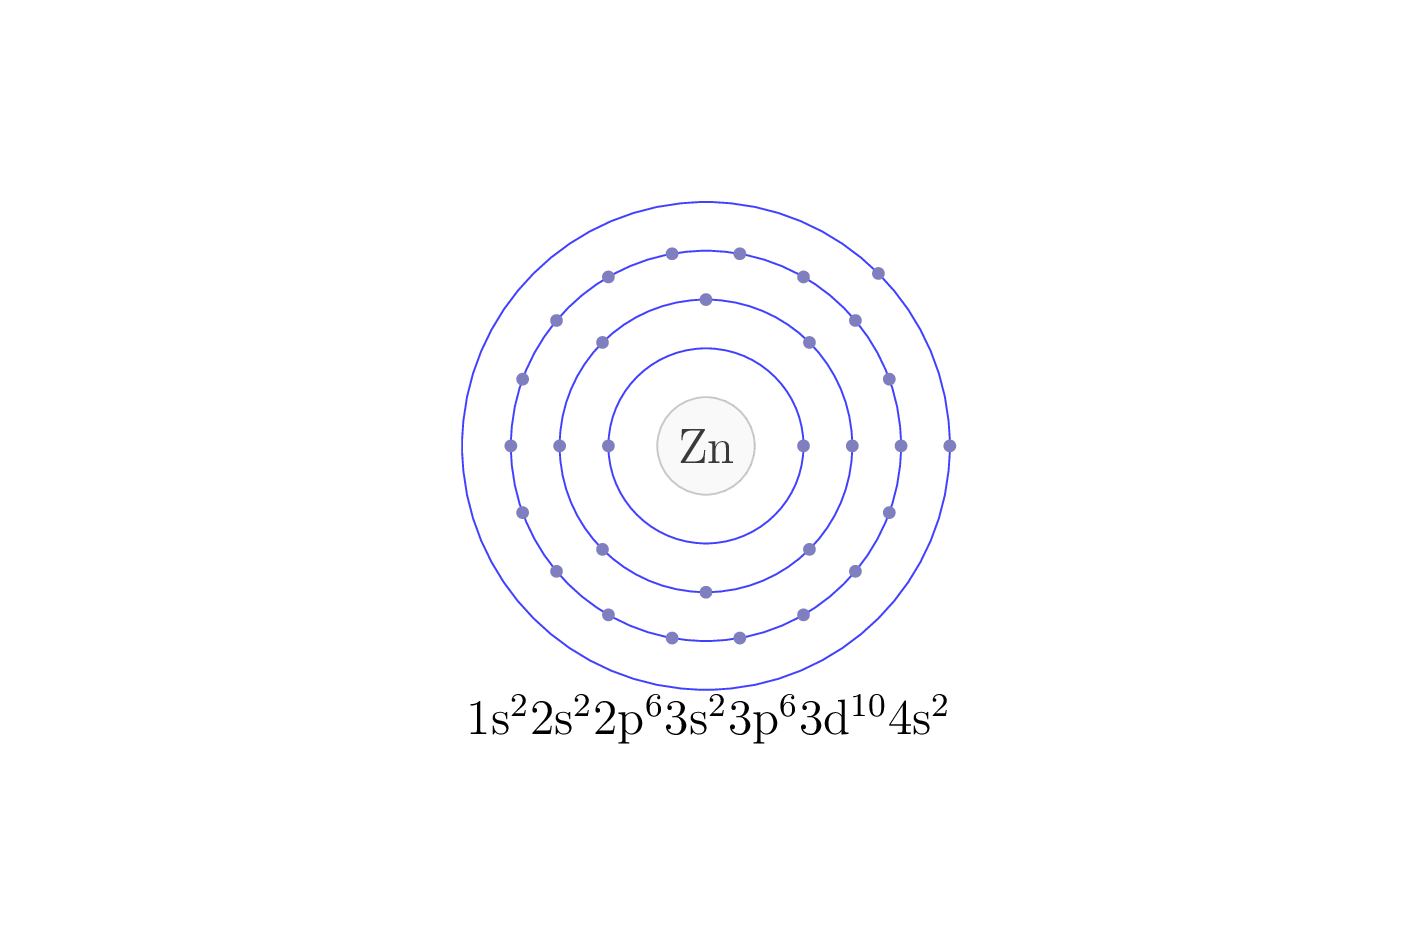 electron configuration of element Zn